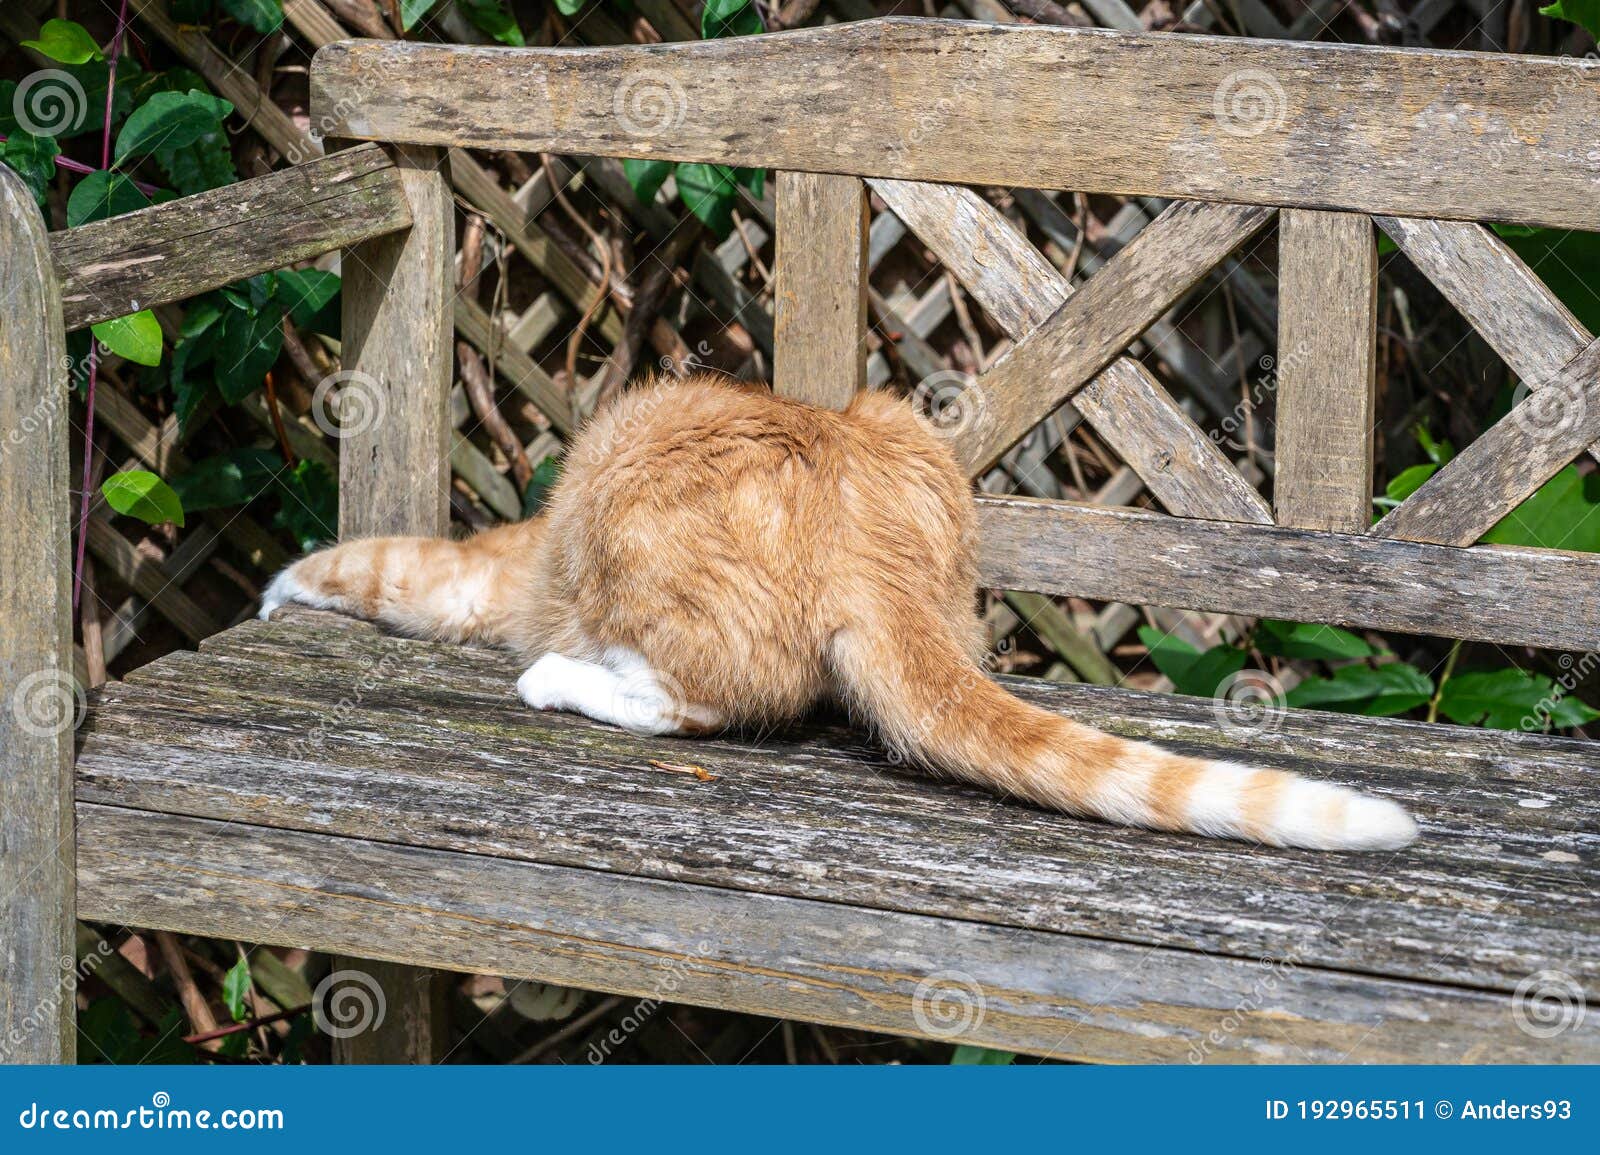 Playful Orange Cat Looking Underneath Wooden Bench Stock Image - Image ...